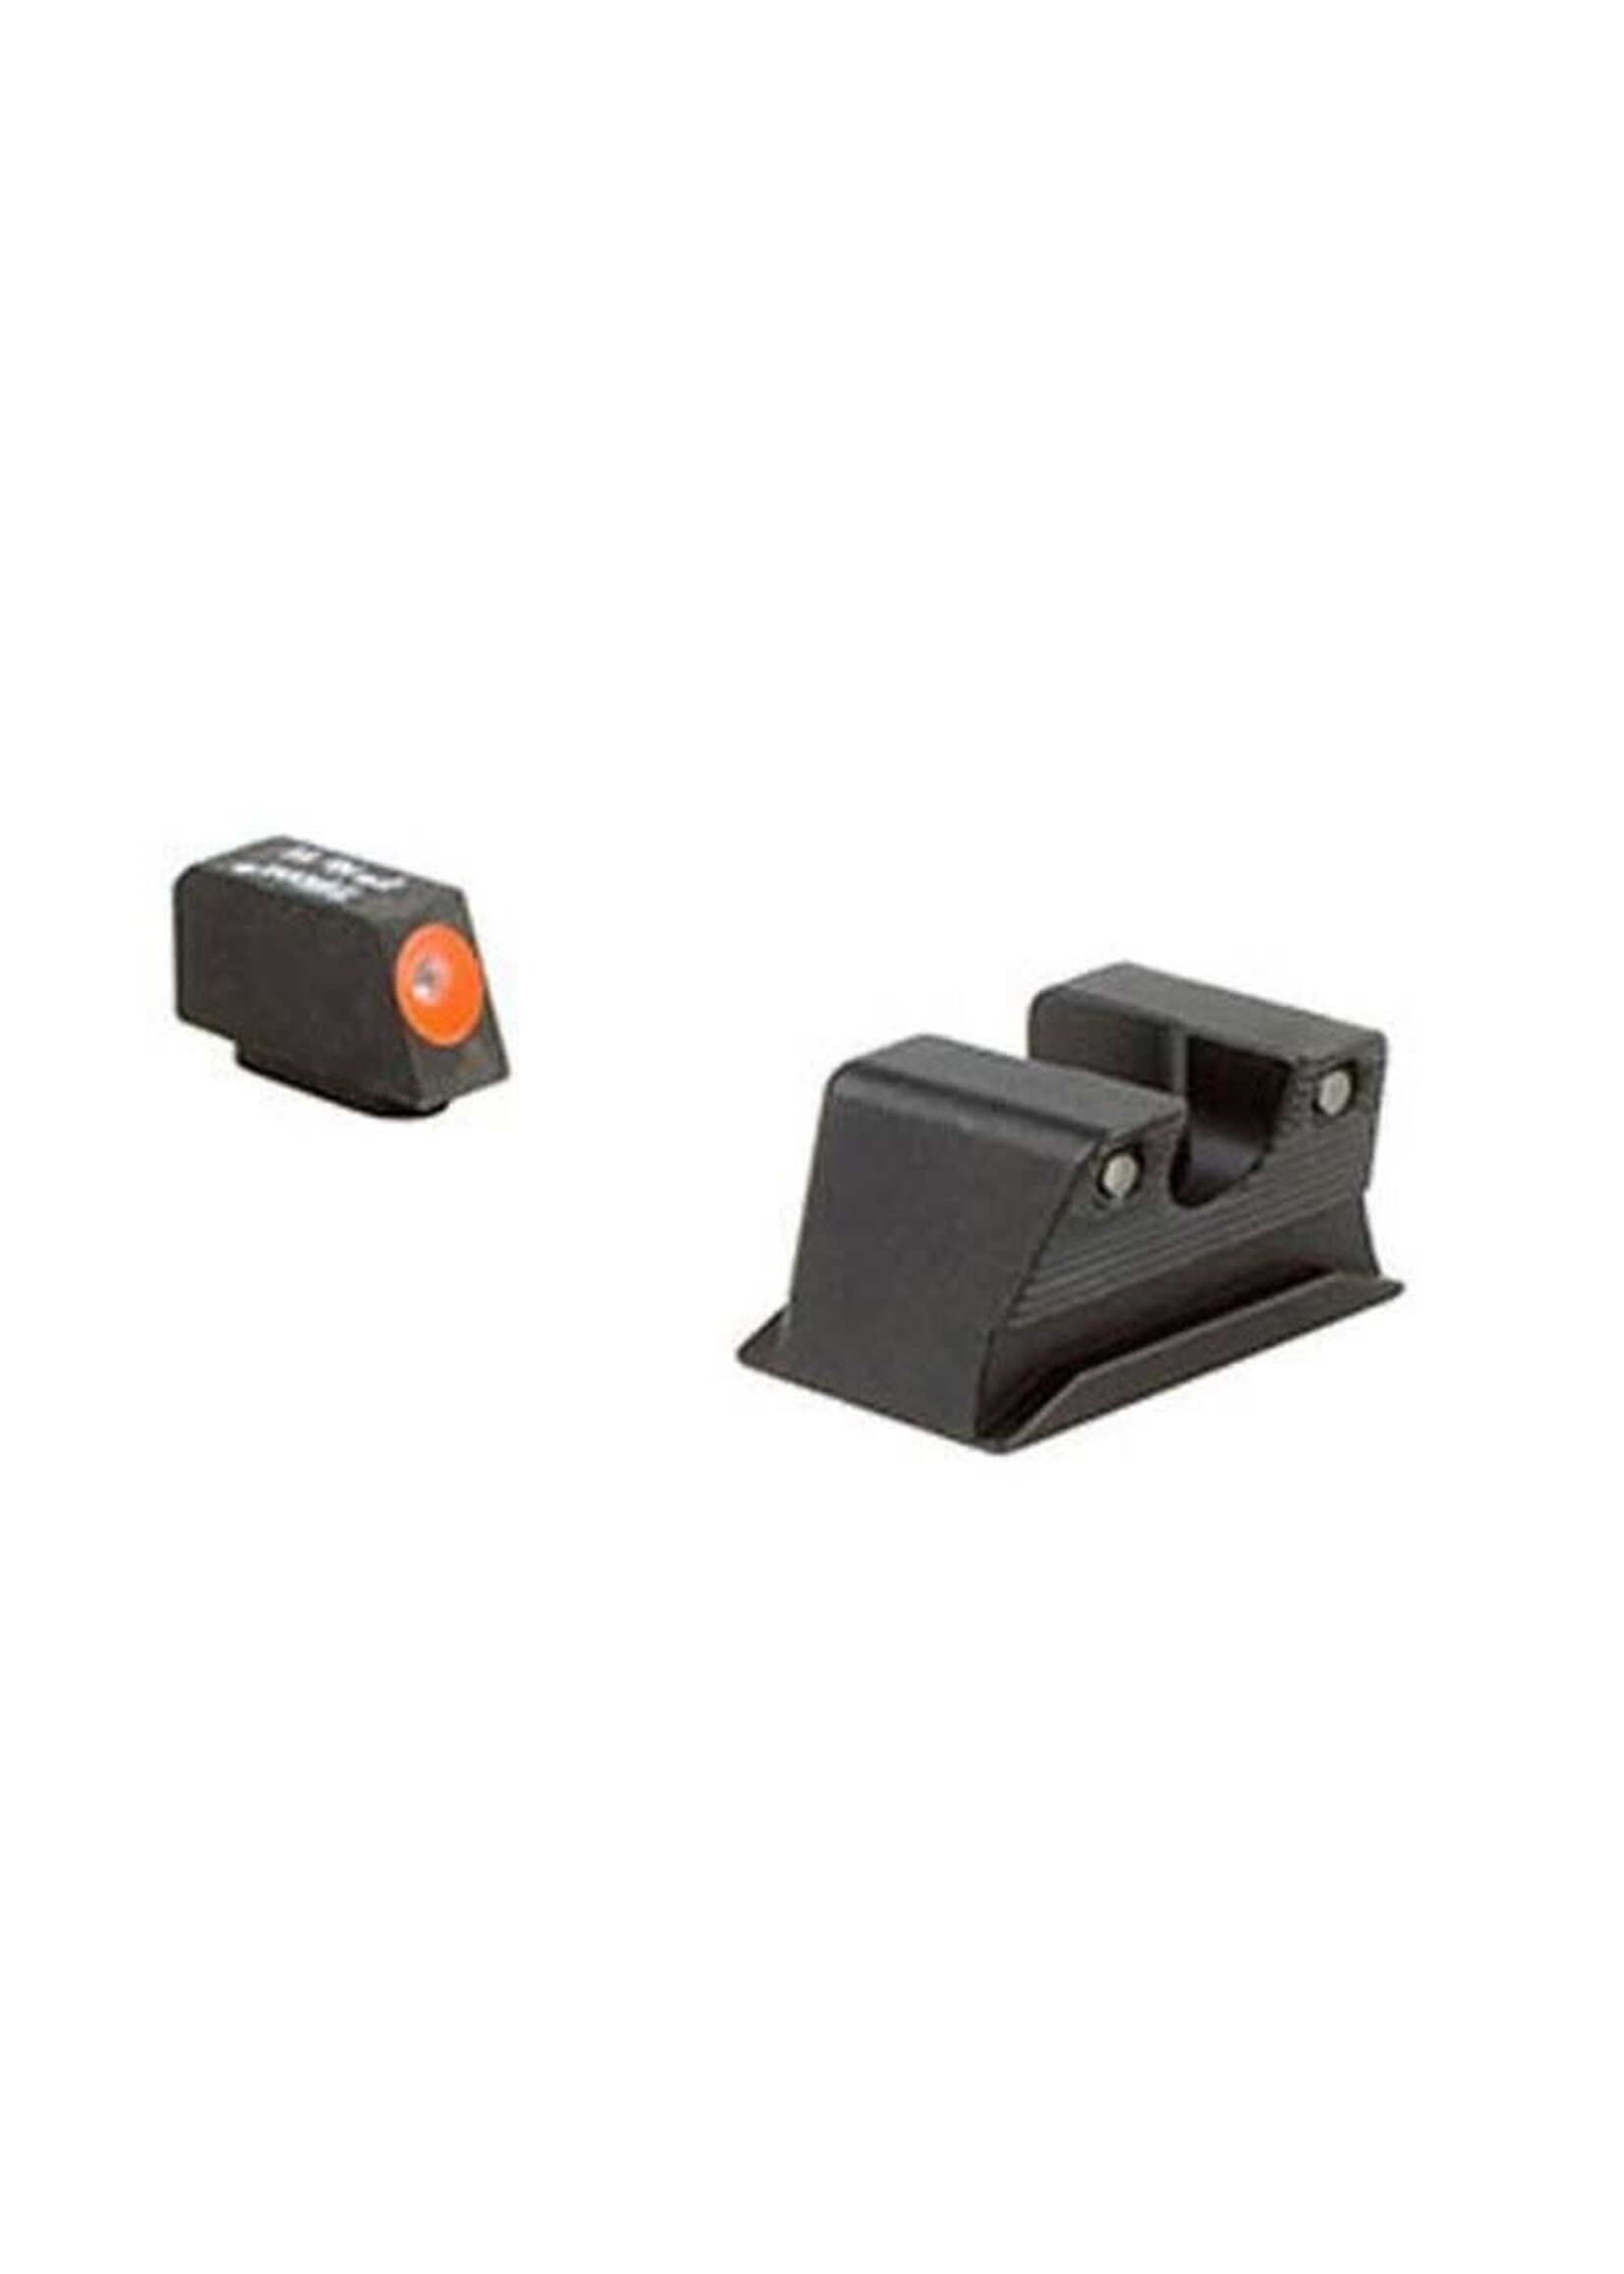 TRIJICON TRIJICON HD NIGHT SIGHTS W/ ORANGE FRONT FOR WALTHER PPS/PPX